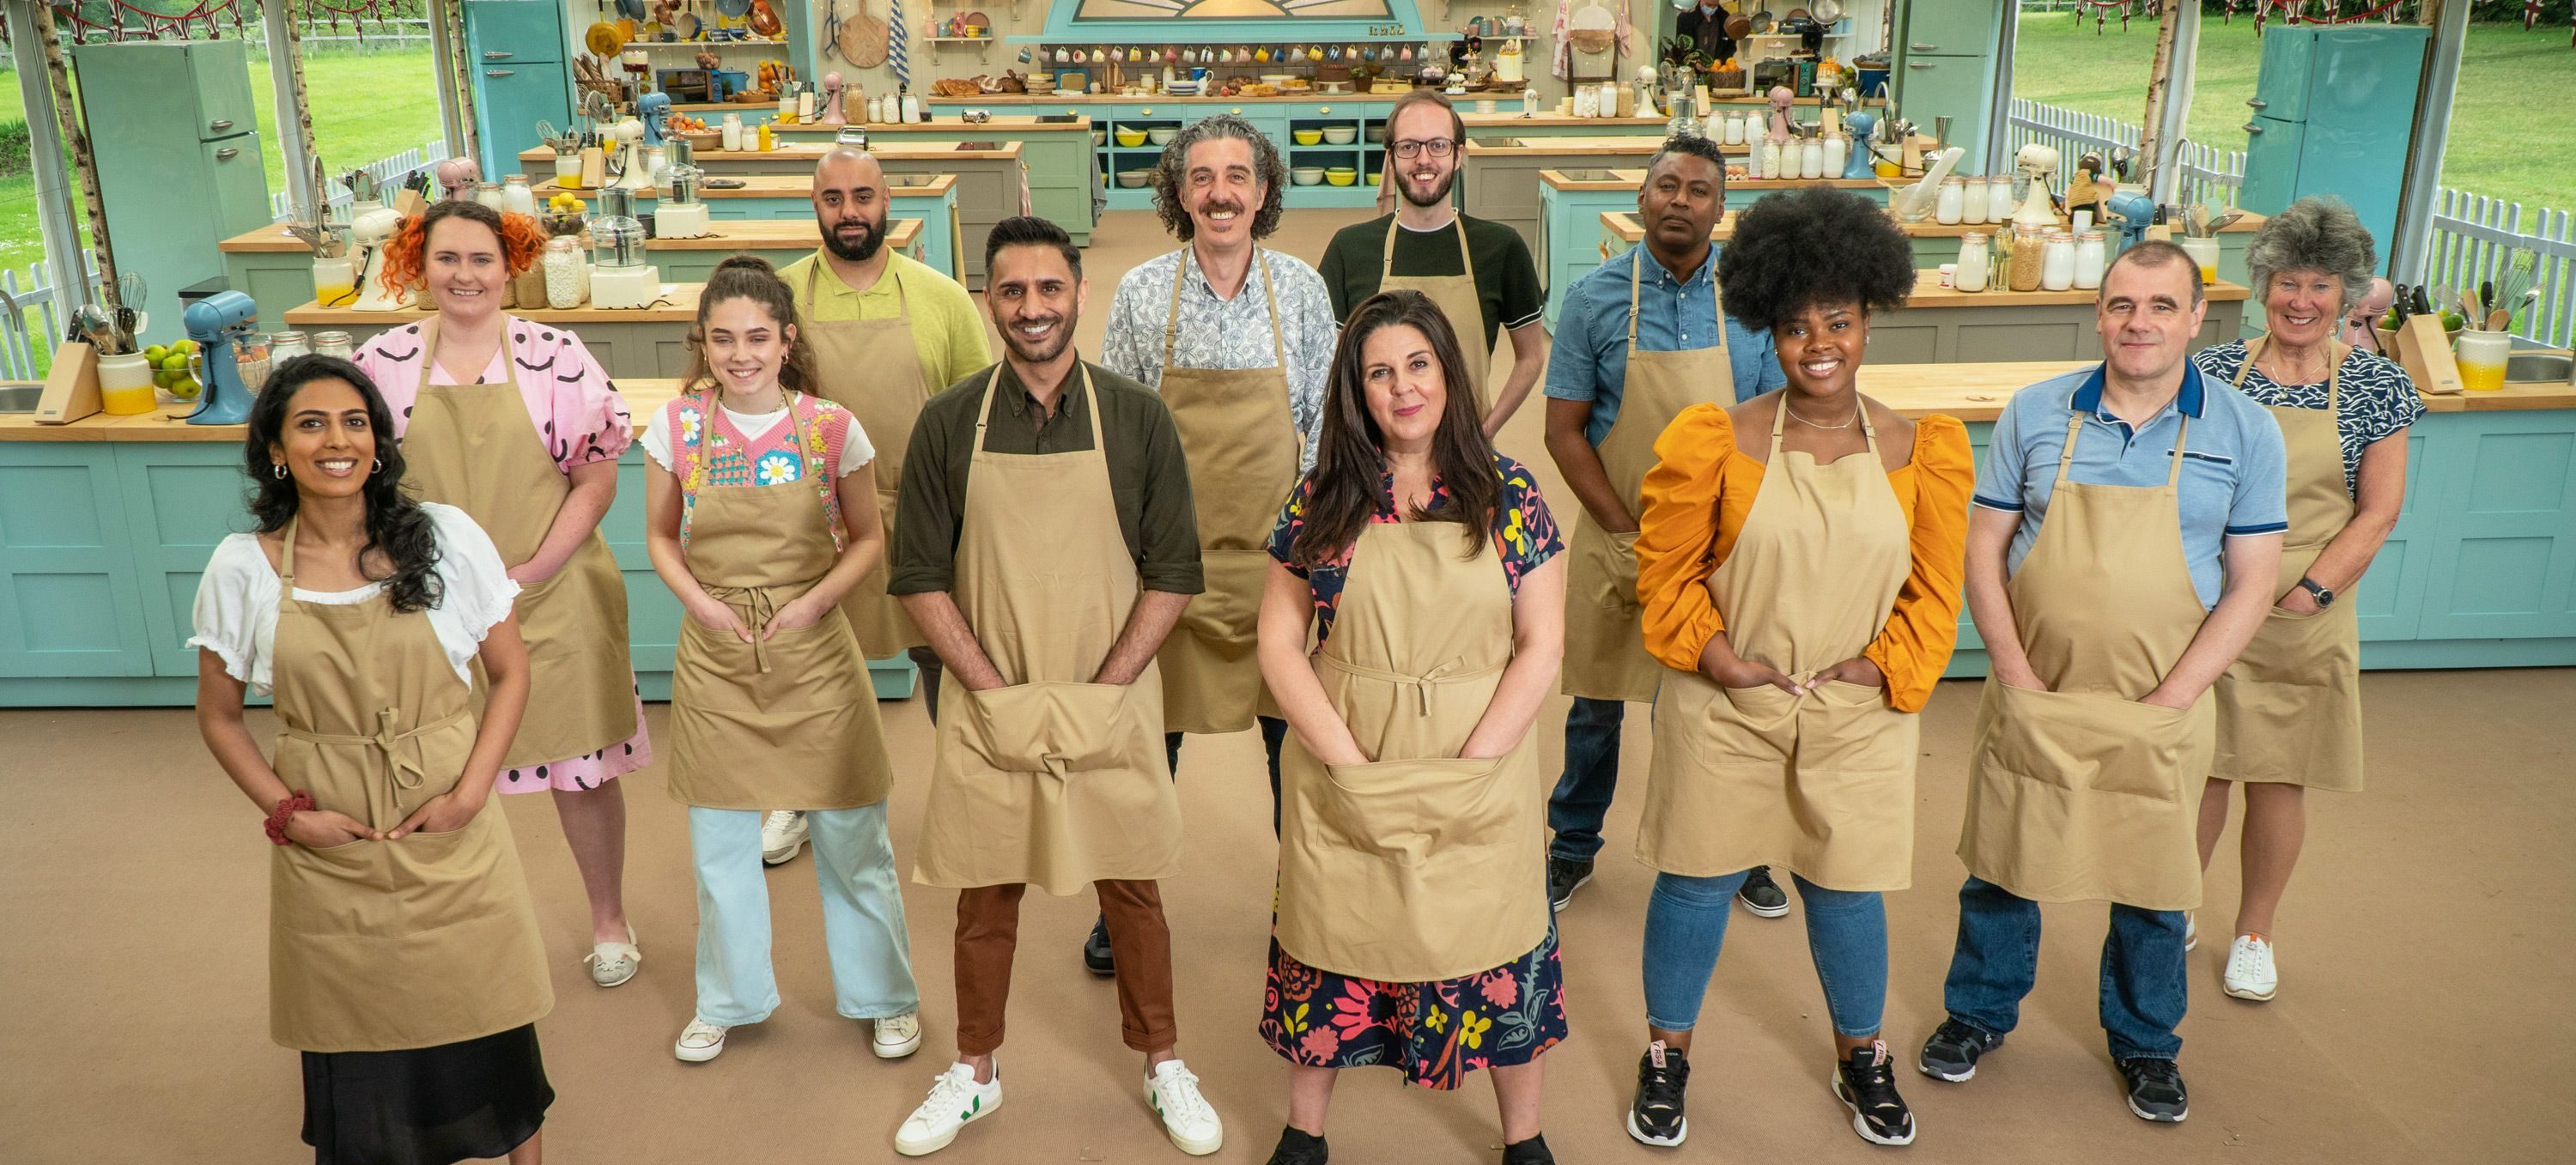 The Great British Baking Show Season 12 Where Are They Now? Update